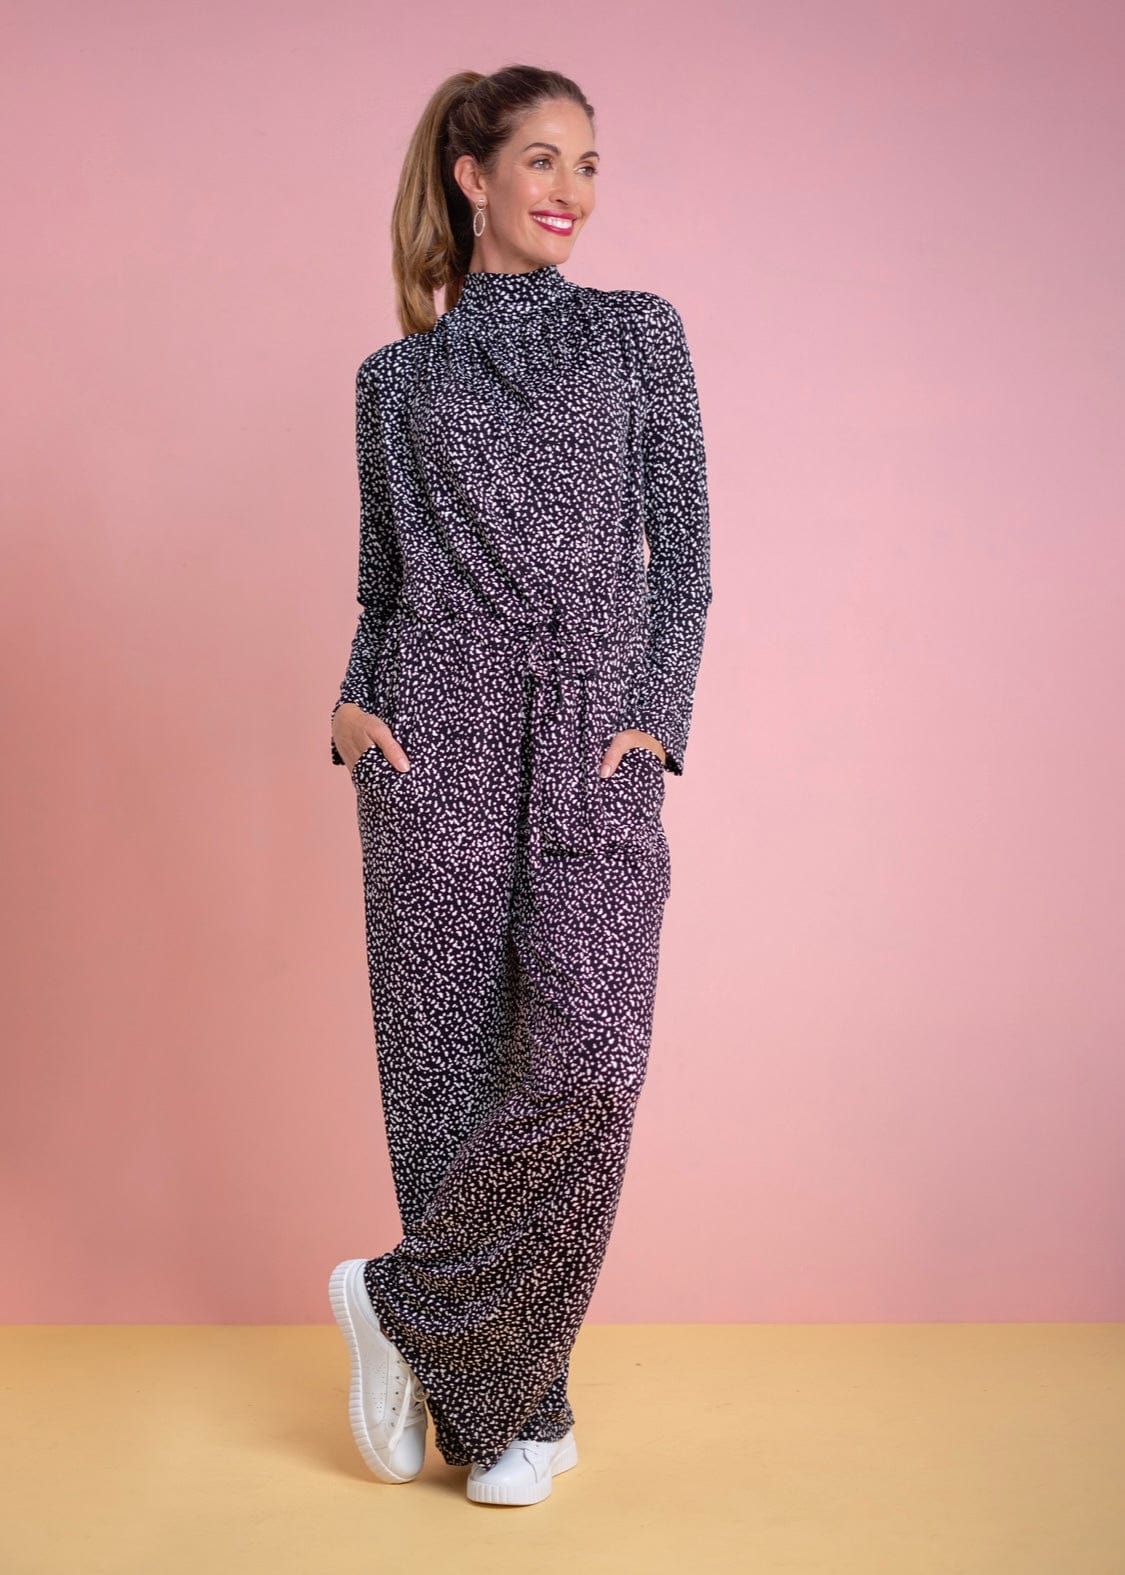 High Neck Winter Jumpsuit In Black and White Polka Dot - Tribute StoreICONIC